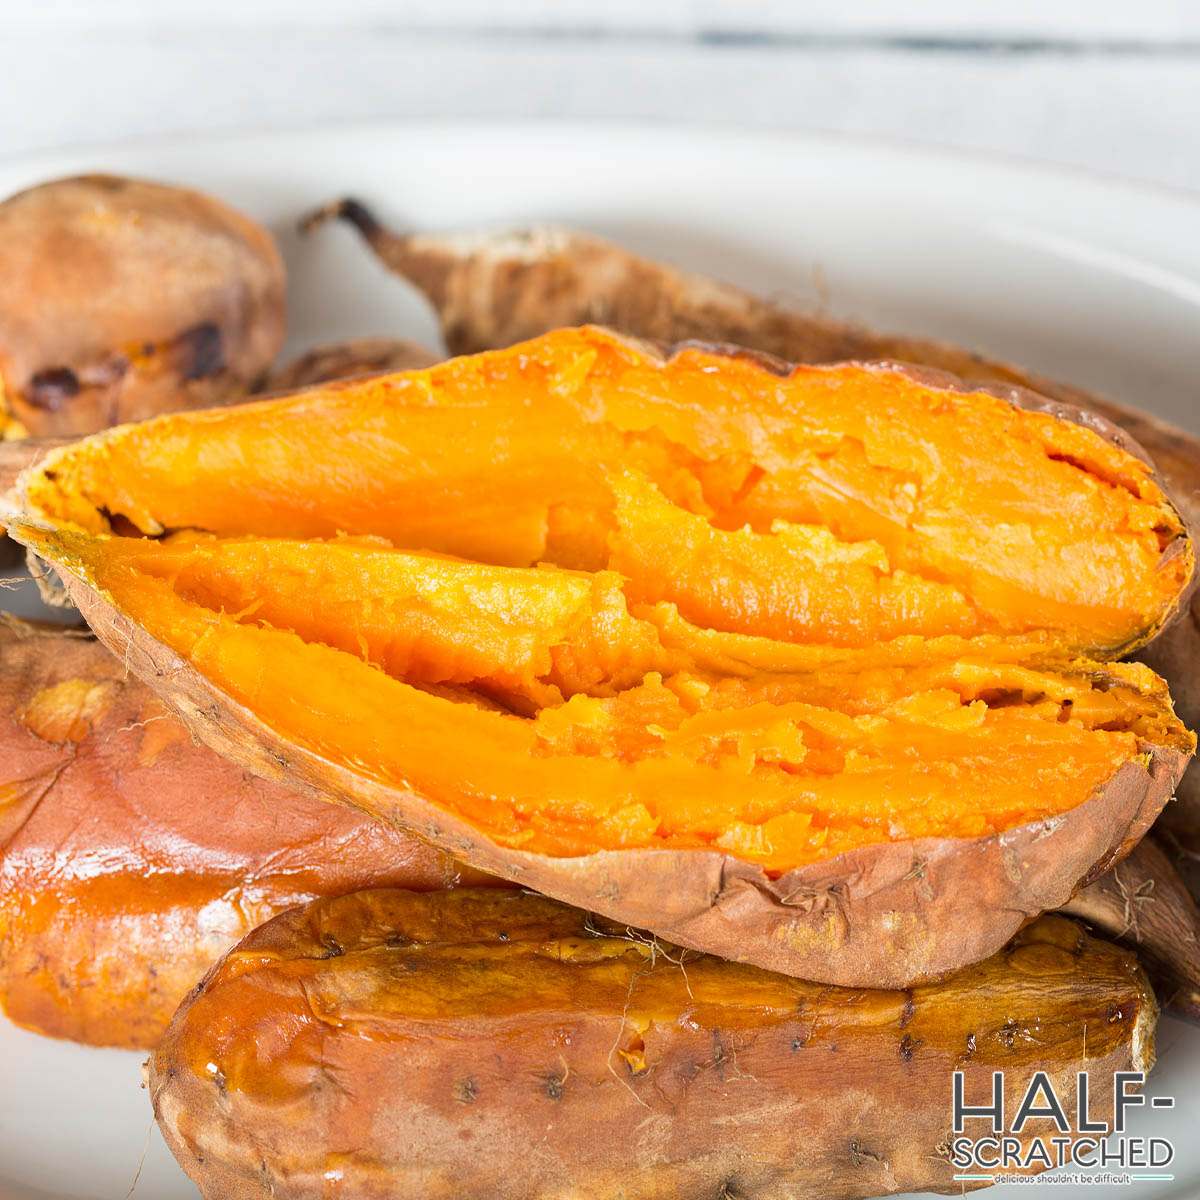 Oven baked sweet potatoes at 425 F